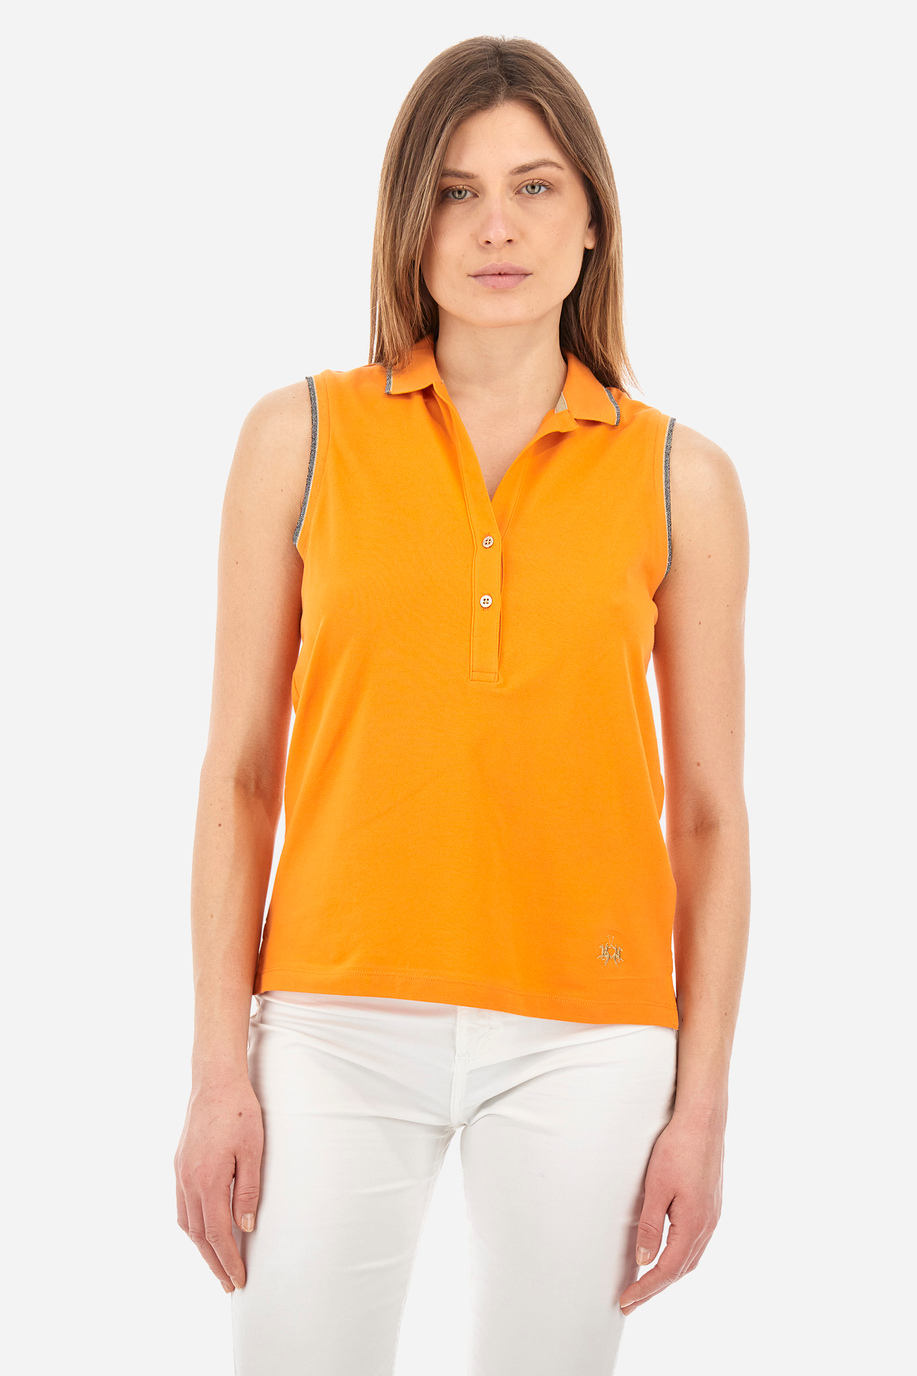 Regular-fit sleeveless polo shirt in elasticated cotton - Yessenia - Spring looks for her | La Martina - Official Online Shop